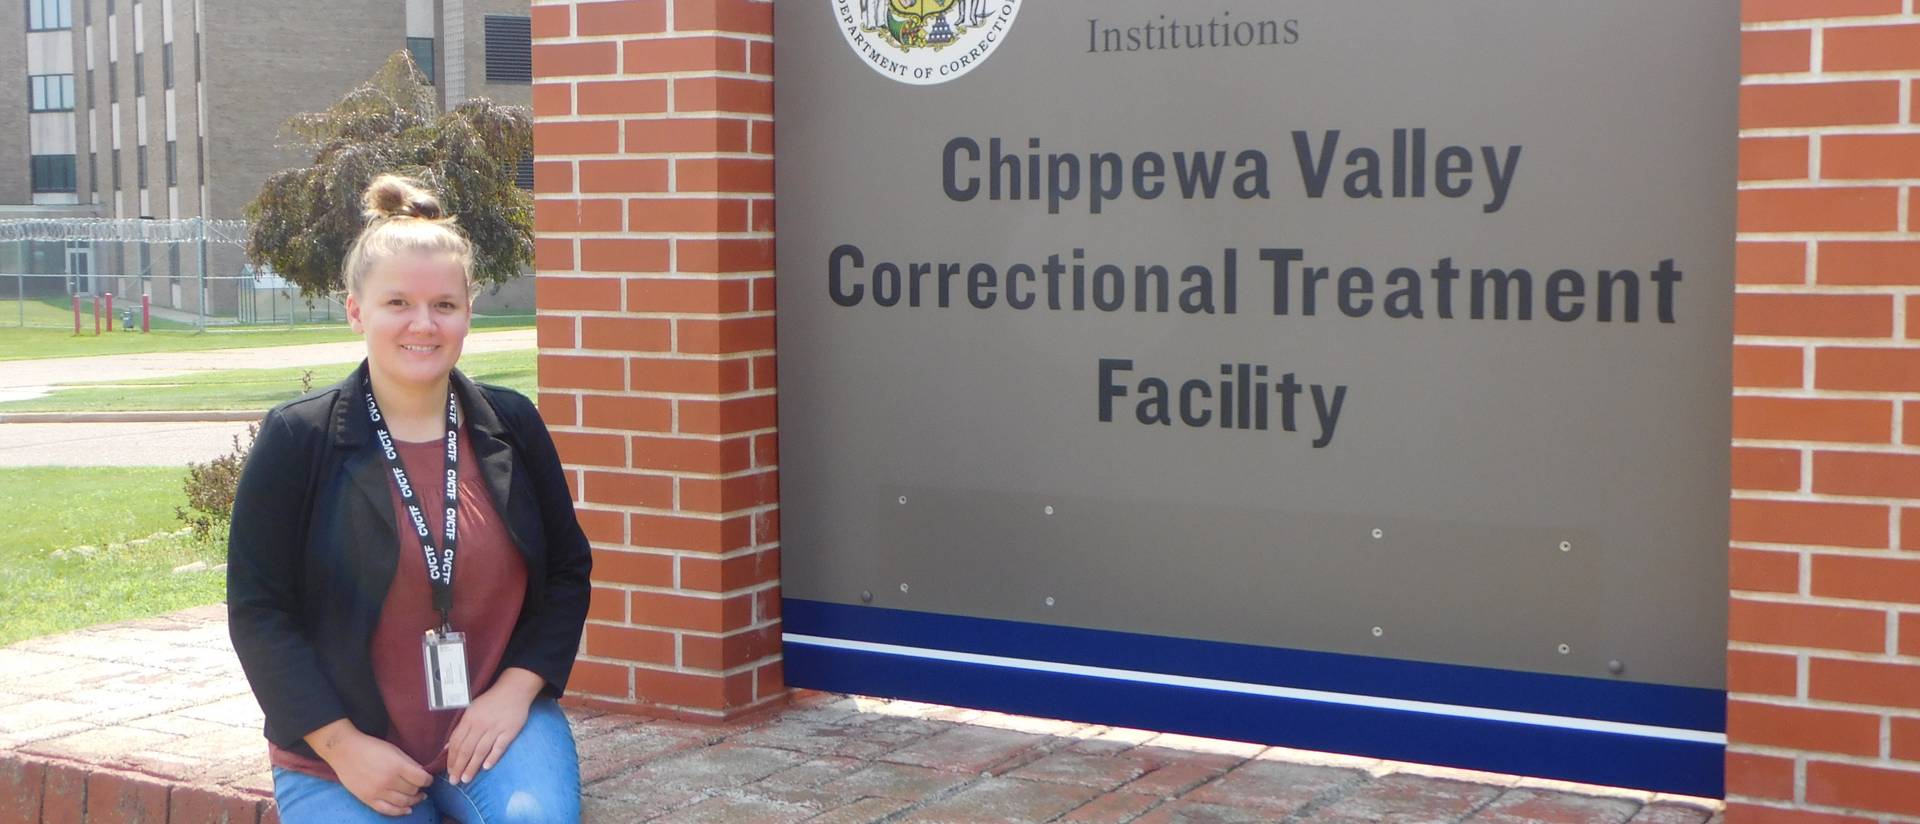 female student seated in front of signage at the Chippewa Valley Correctional Treatment Facility